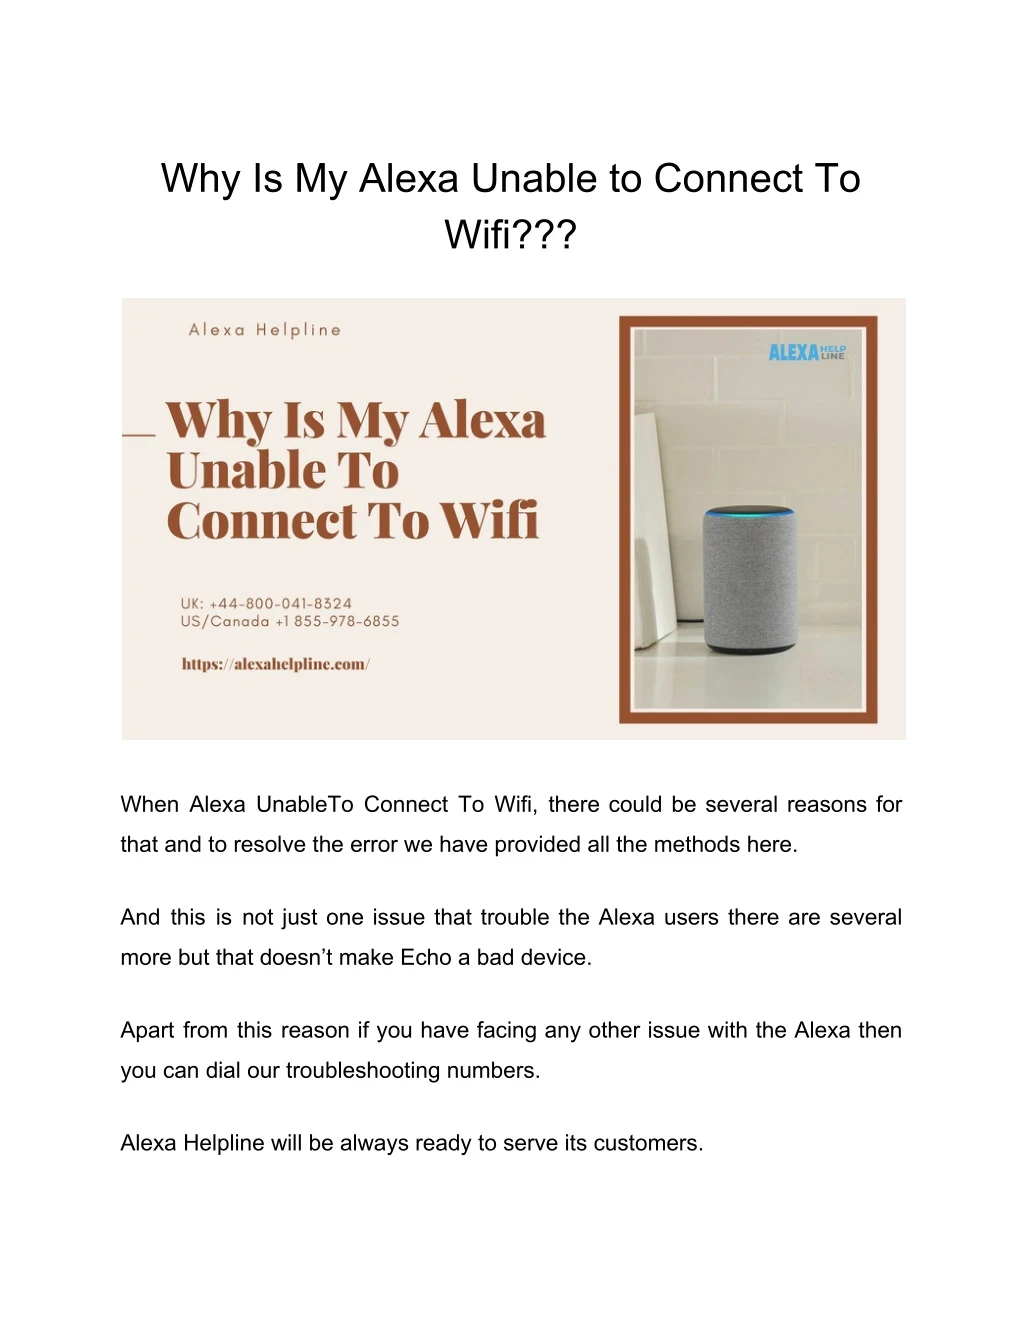 why is my alexa unable to connect to wifi